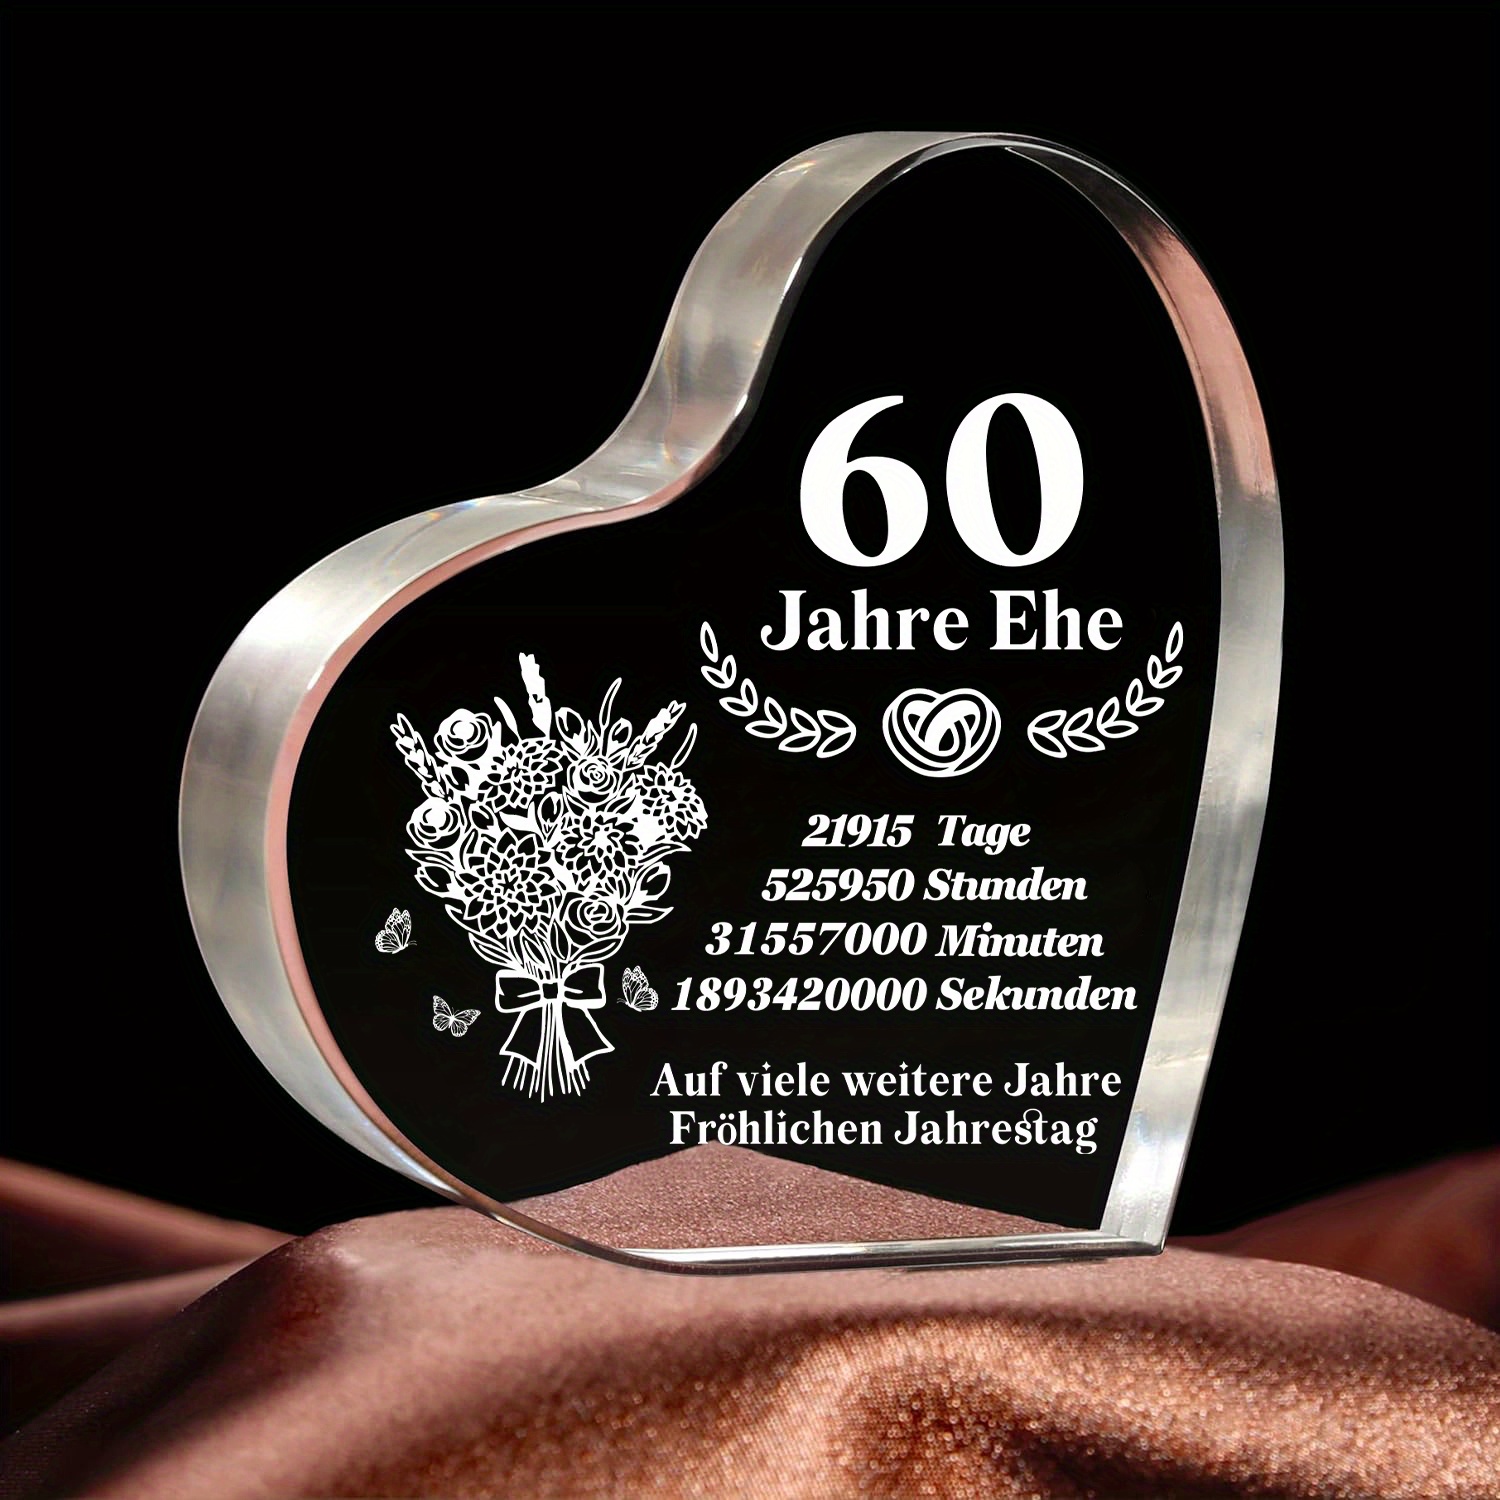 1pc german acrylic 60 years of marriage anniversary gifts for couple happy 60th anniversary wedding clear paperweight christmas gifts keepsake wedding decoration for women man mom dad parents